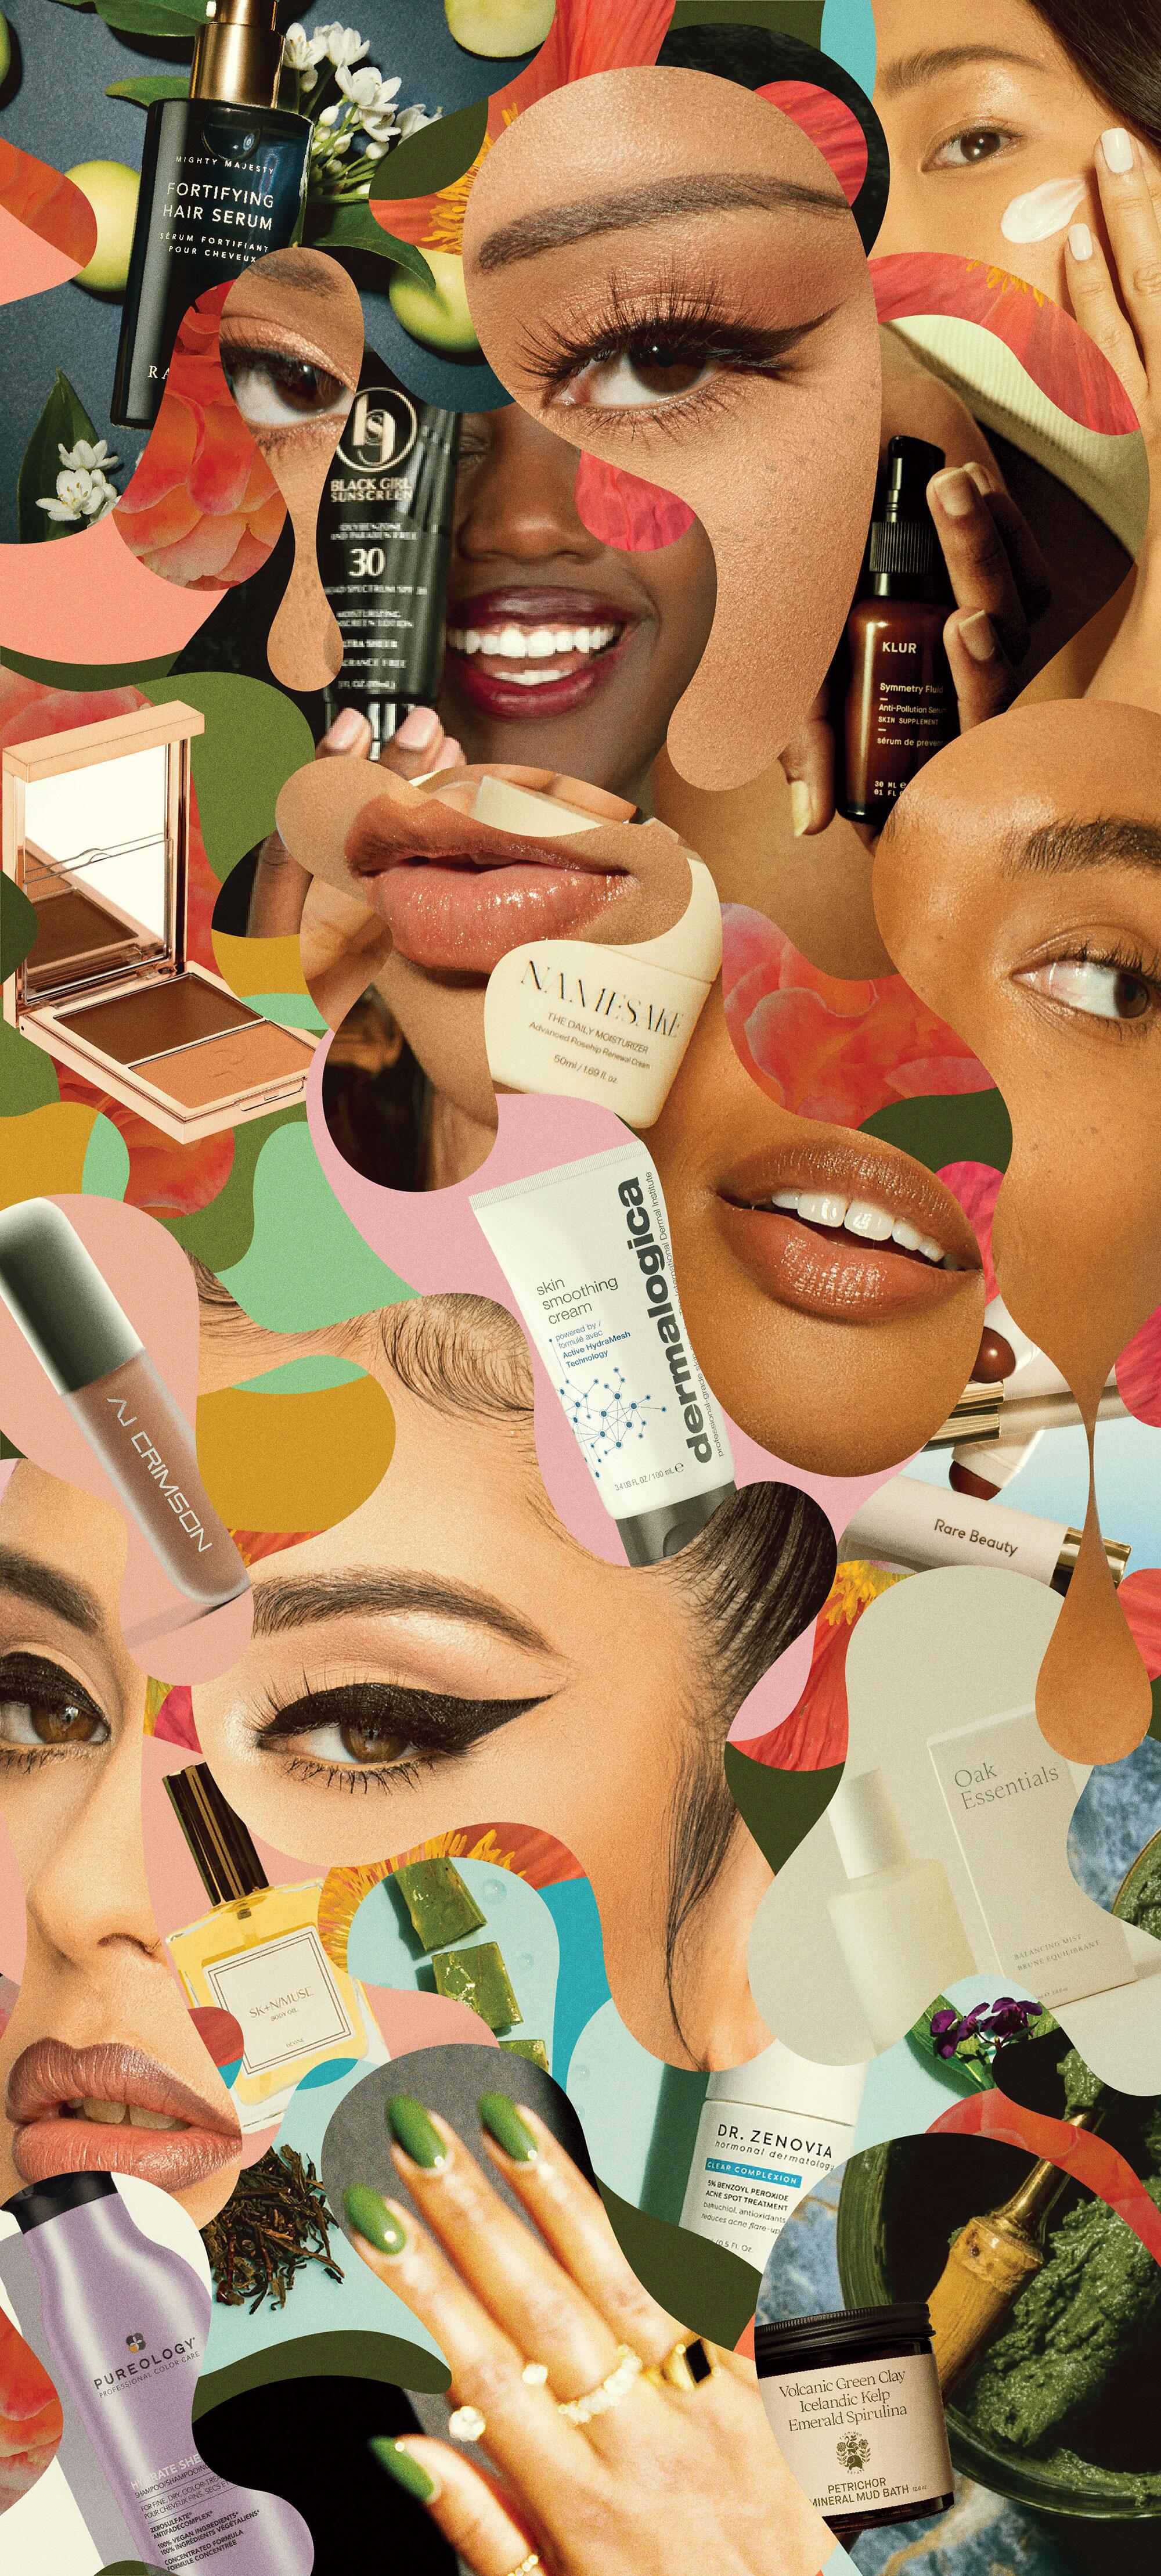 75 Best Beauty Tips - Makeup, Skincare, and Hair Advice for Women